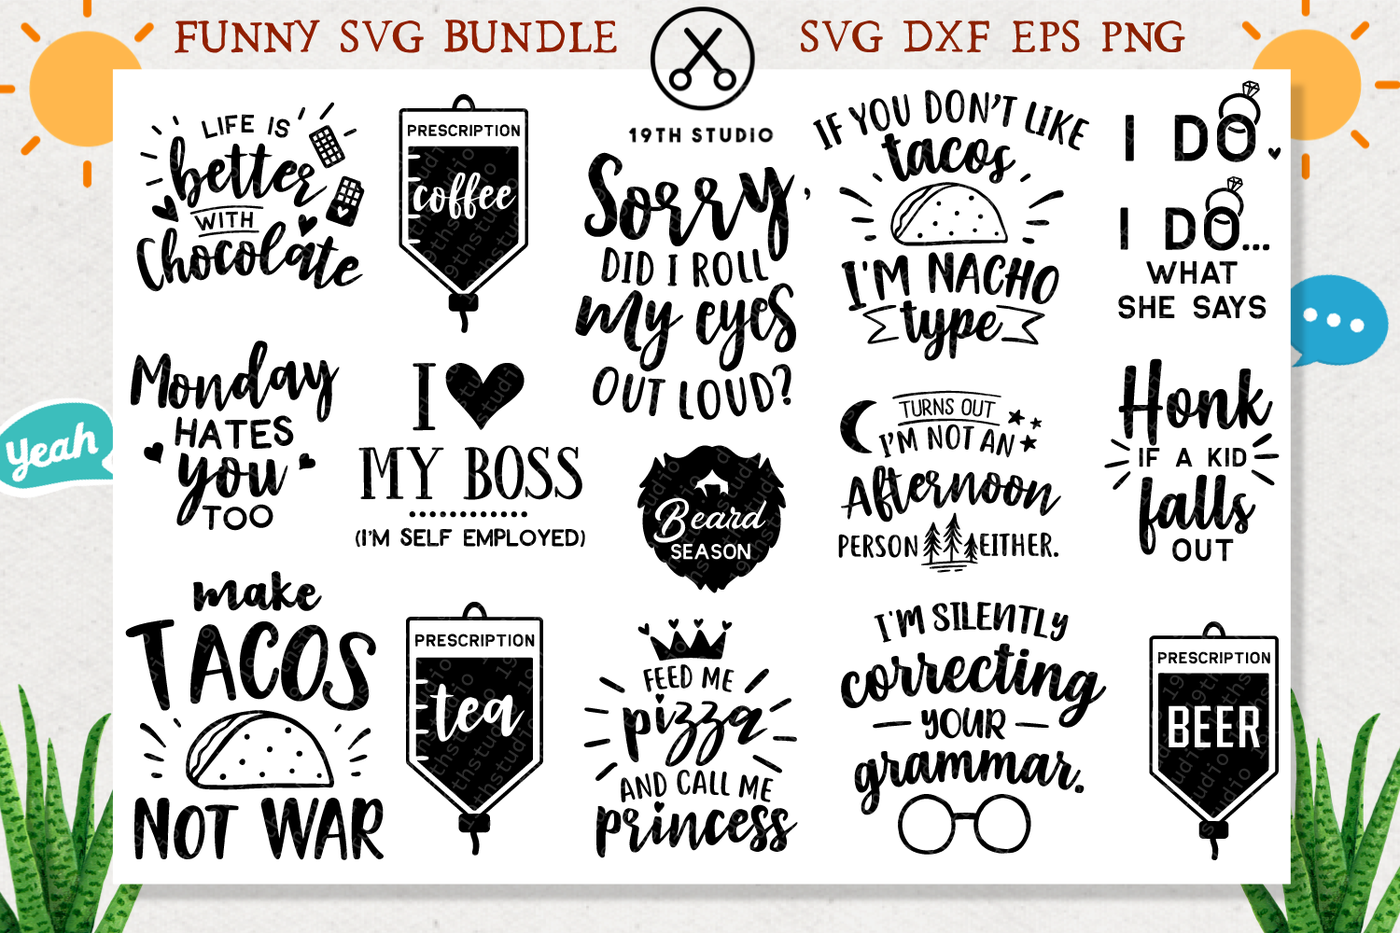 Download Funny Svg Bundle Svg Dxf Eps Png M4 By 19th Studio Thehungryjpeg Com